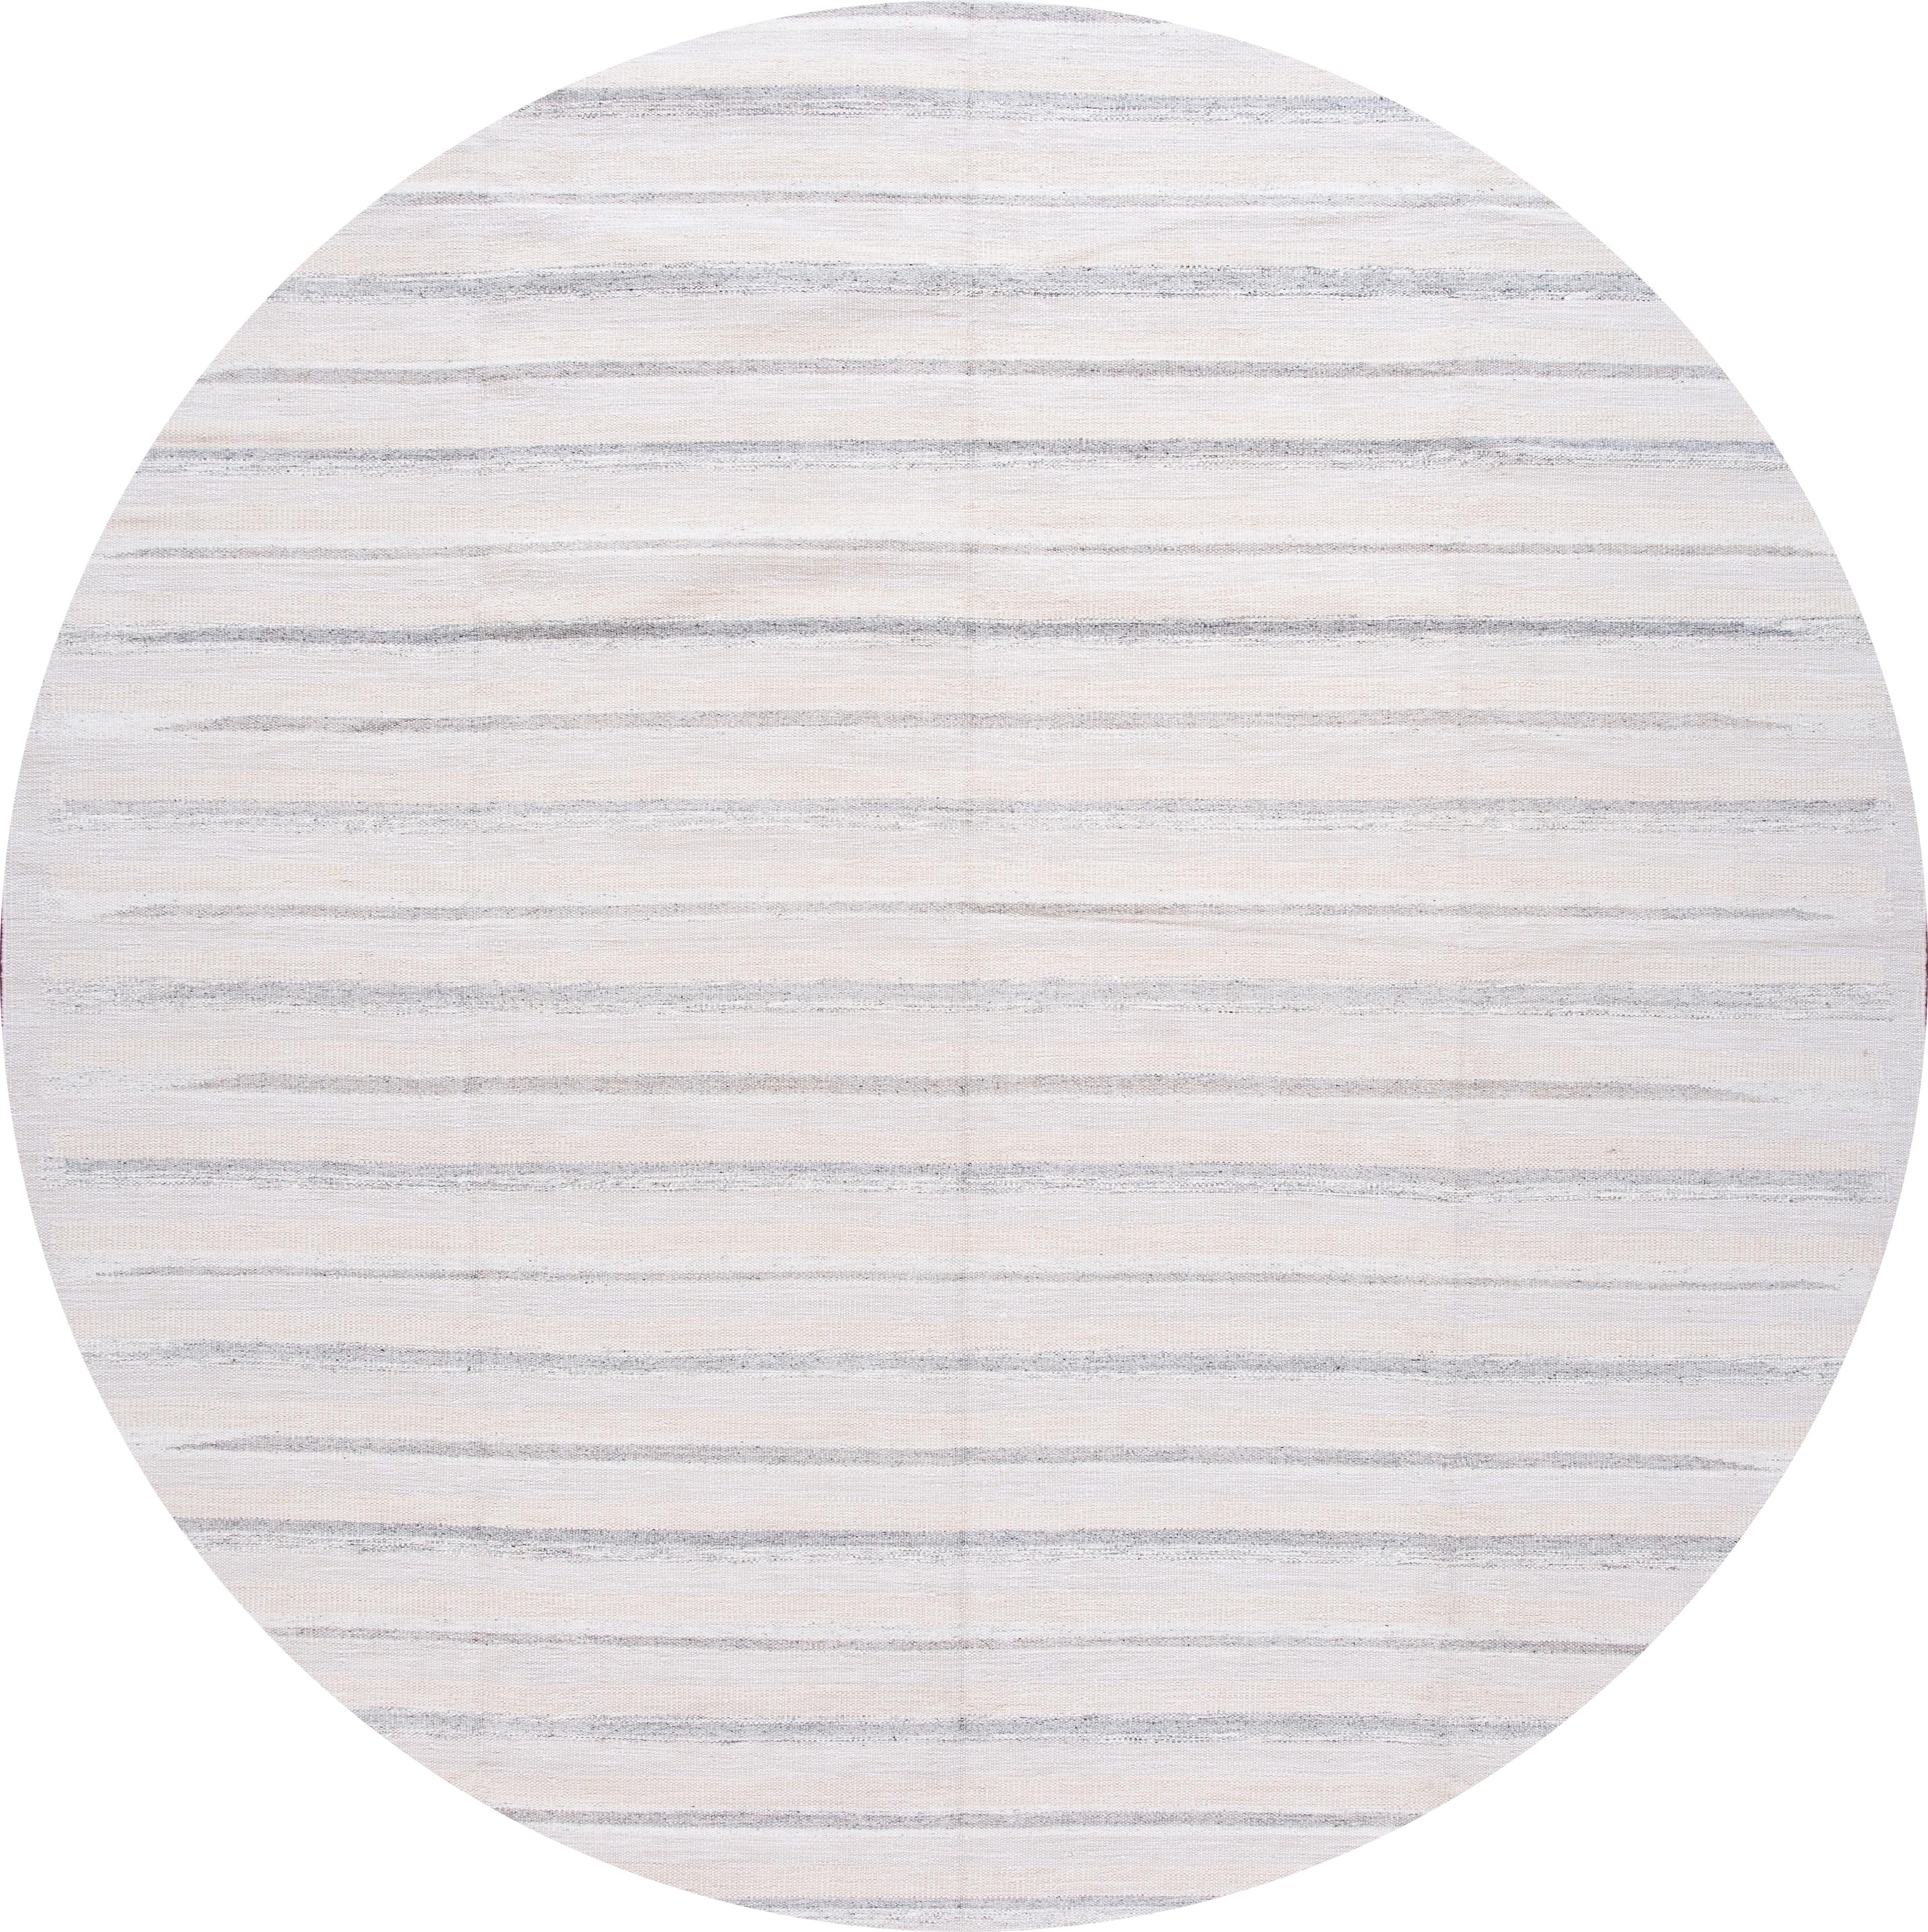 Beautiful 21st century modern Swedish hand knotted wool rug with an ivory field, beige, and gray accents in an all-over stripe design

This rug measures: 12'1